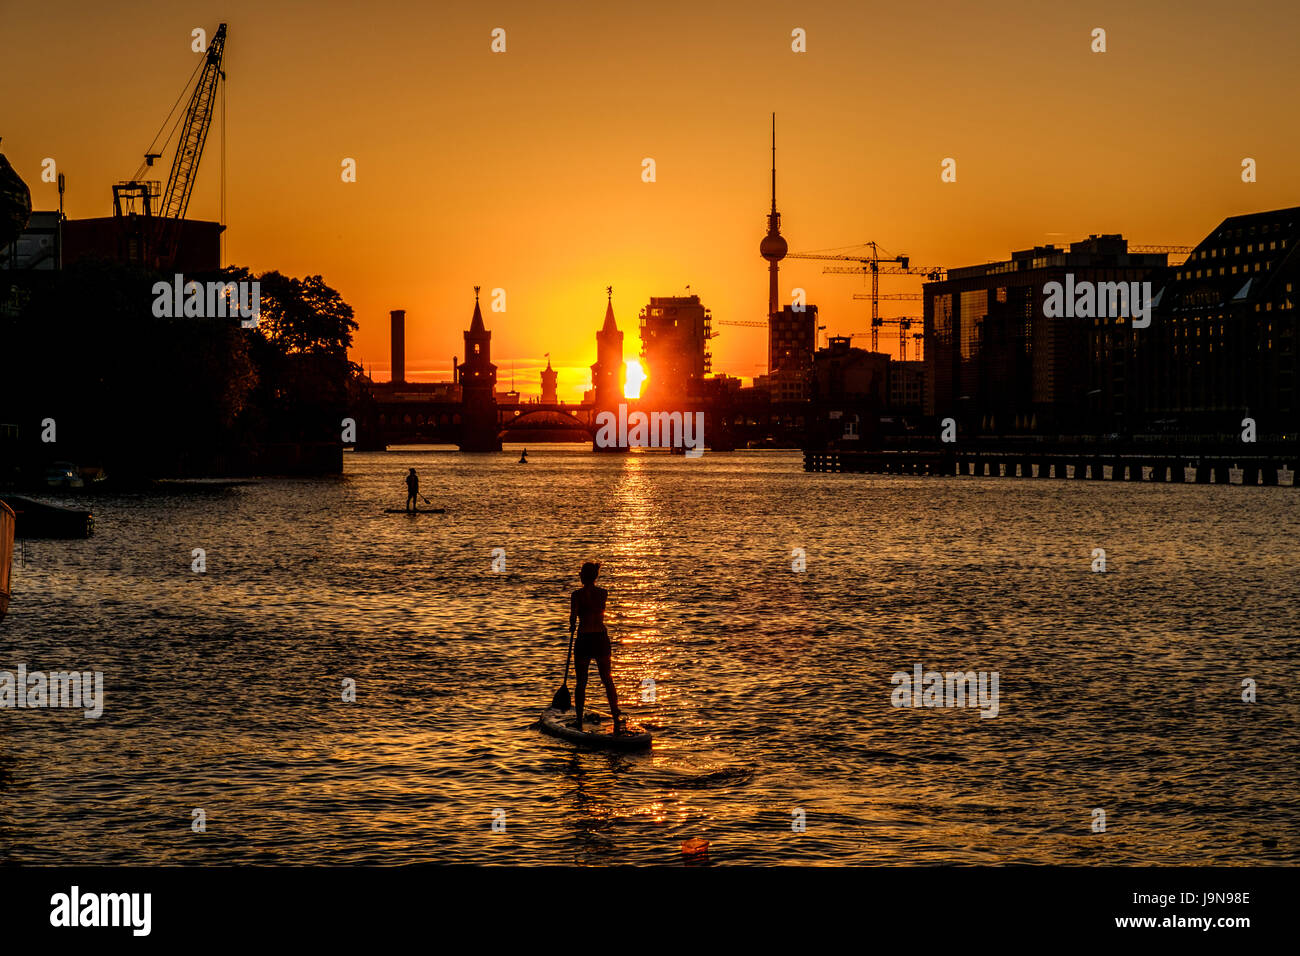 Oberbaum Bridge, Tv Tower , sunset sky and  paddle board / stand up paddler on river Spree in Berlin Stock Photo